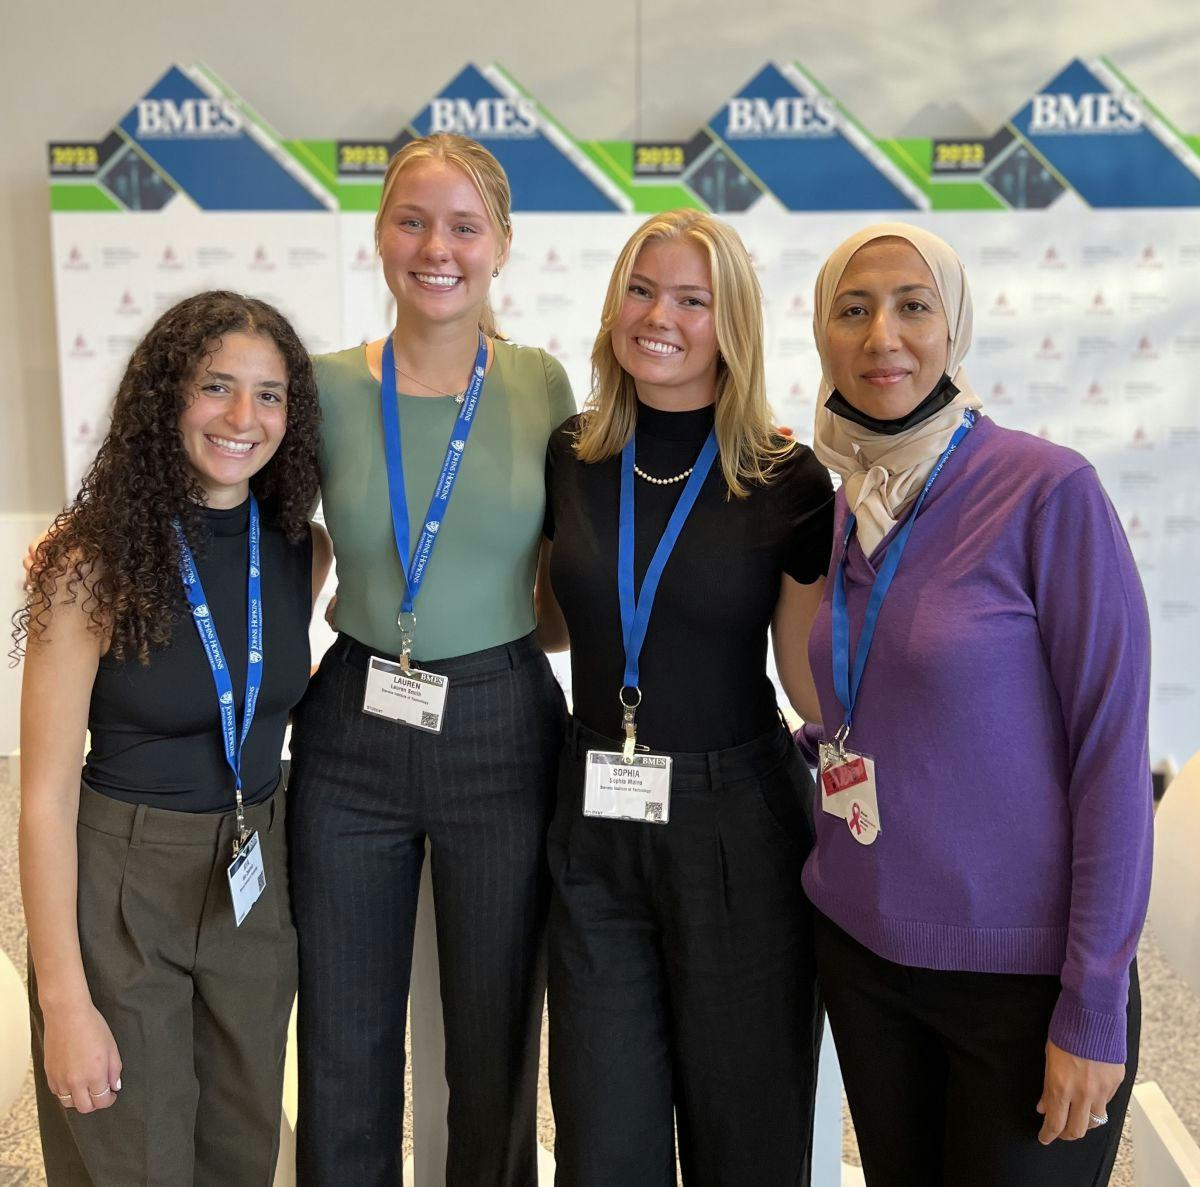 A group of four women stand together in front of a conference poster with "BMES" signage